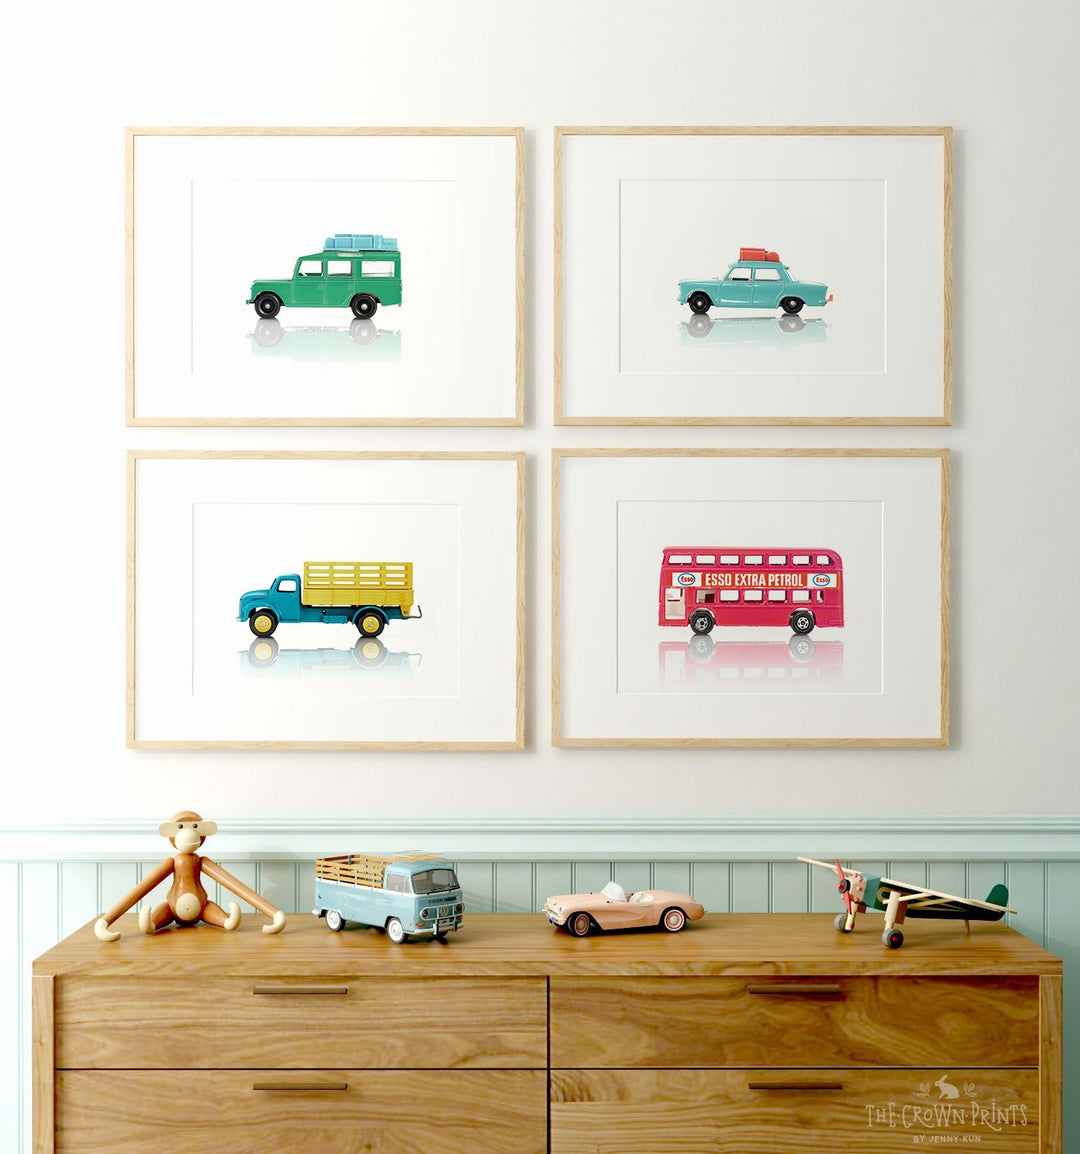 Toy Cars Prints - Set of 4 - The Crown Prints